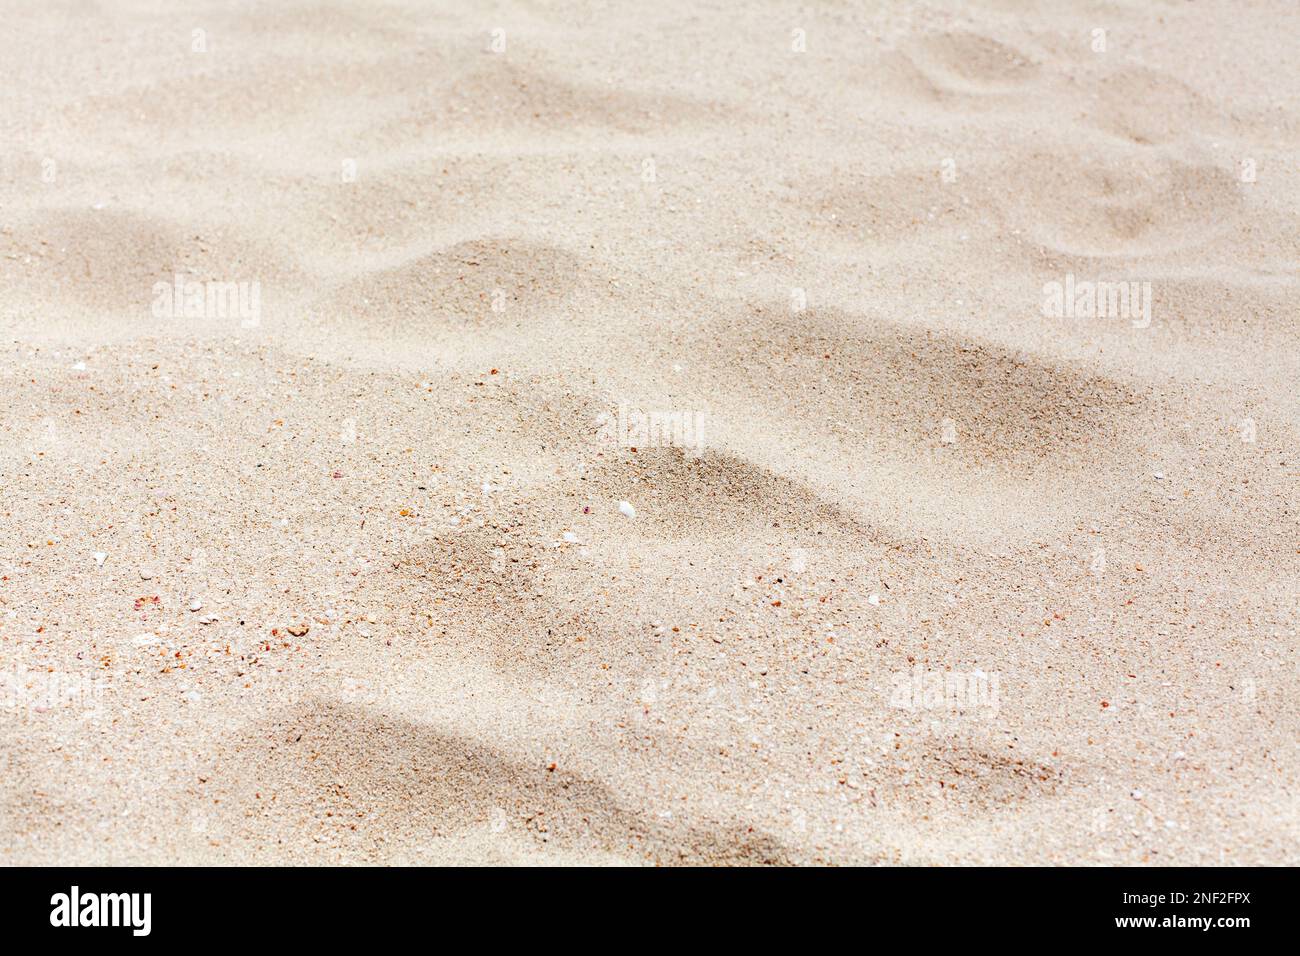 White sand texture close up background, wavy sandy pattern, natural dry sand grains backdrop, clean beige rippled sand surface top view, desert dune Stock Photo